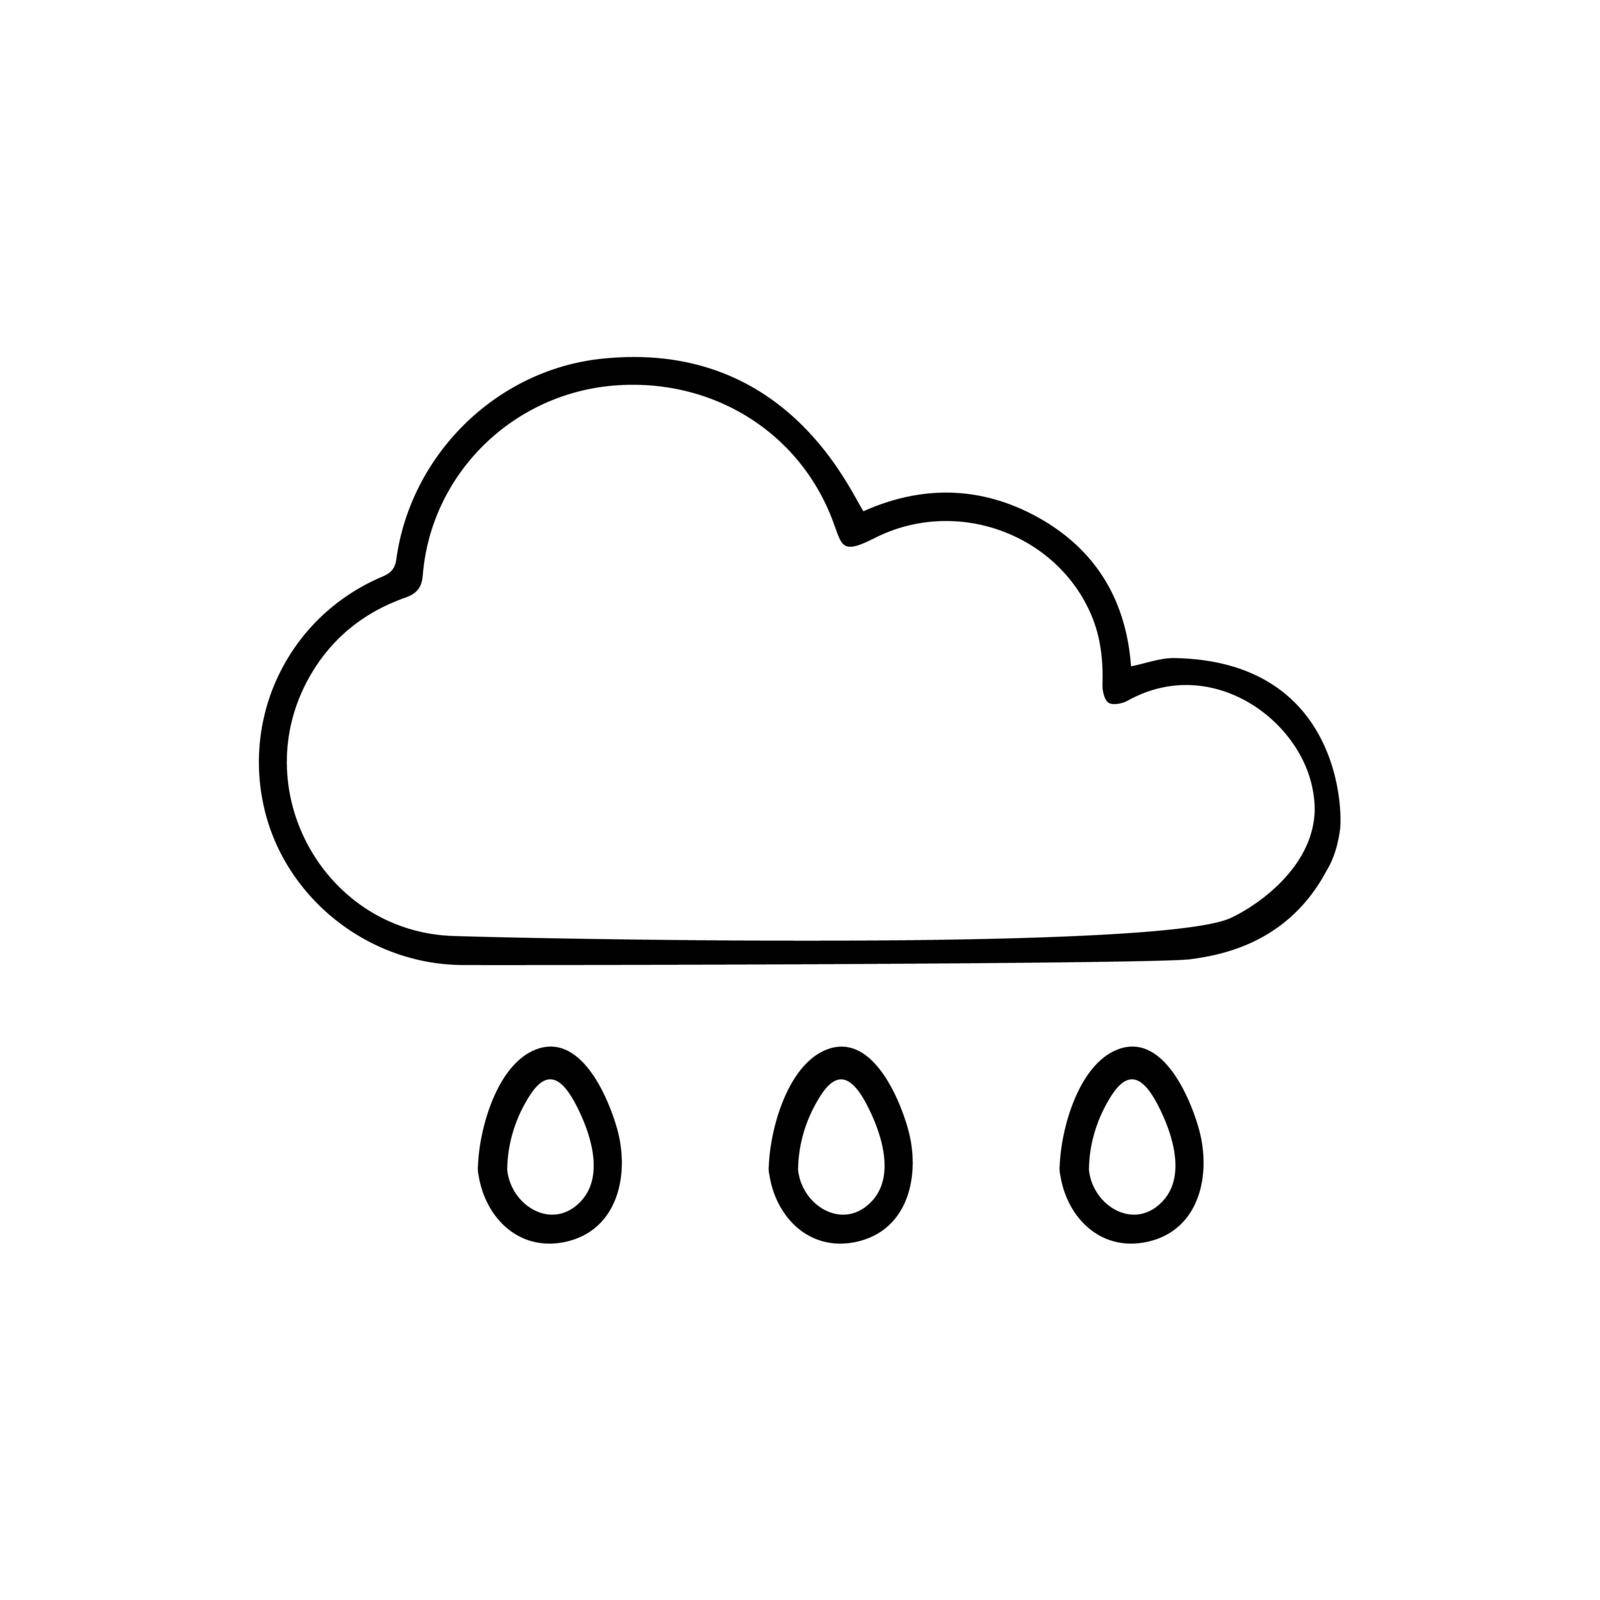 Rainy cloud thin line icon isolated on white background - Vector by BEMPhoto